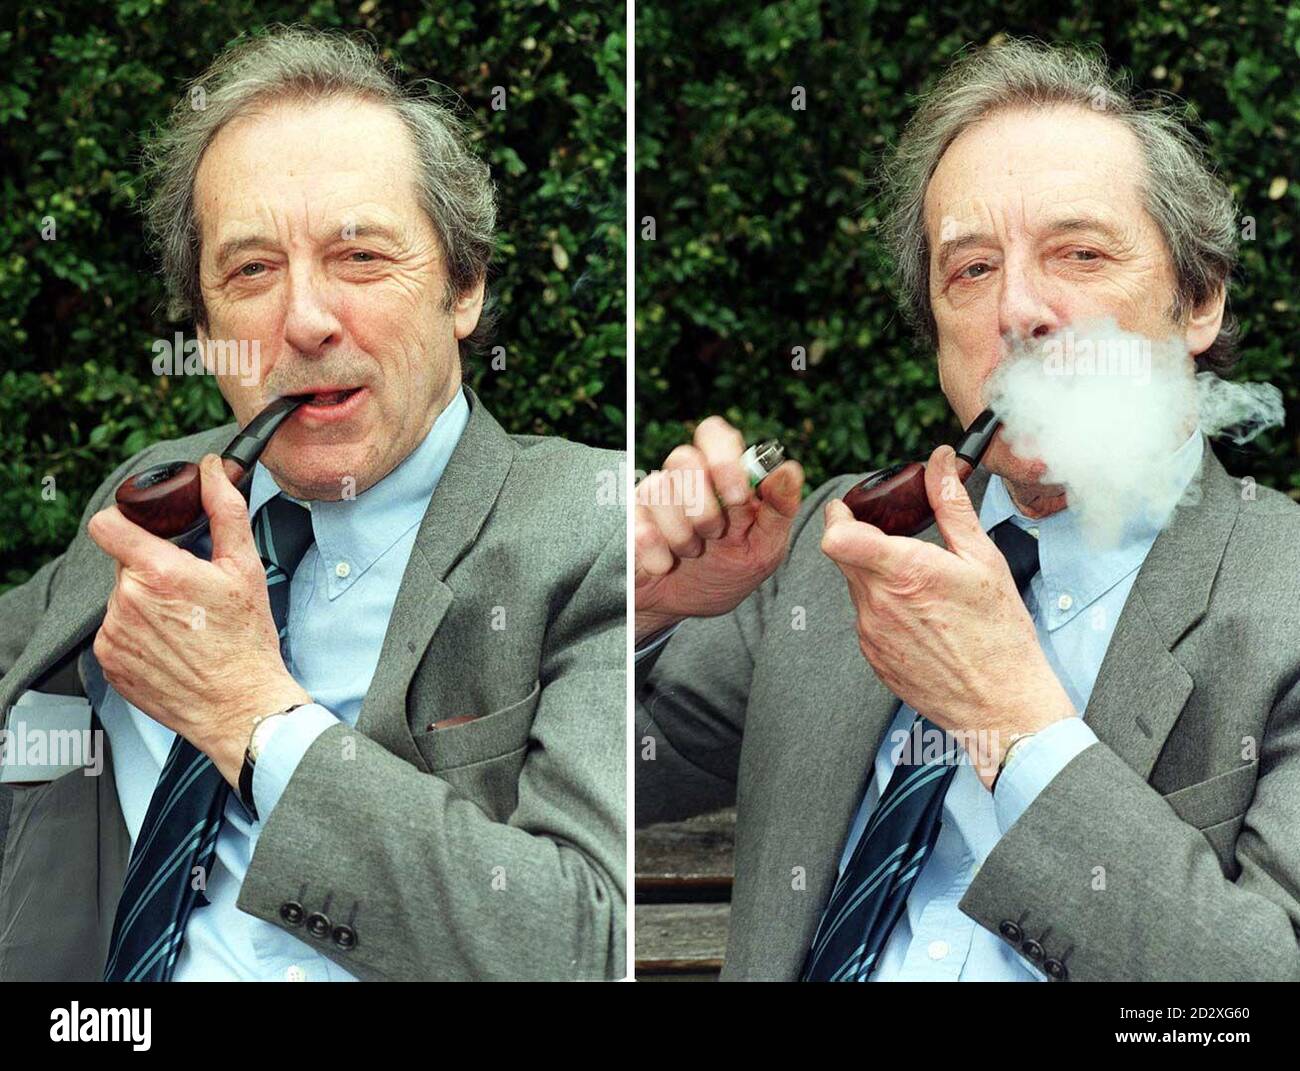 Author Malcolm Bradbury, whose short novel 'Cuts' was broadcast on ITV on New Years Eve, enjoys a smoke after he was named Pipersmoker of the Year in London. Bradbury is only the second novelist to win the POY award. The first was JB Priestley in 1979.     * 27/11/00: Sir Malcolm Bradbury has died. He was 68. The writer of The History Man passed away after a long illness at his home in Norwich.  Stock Photo